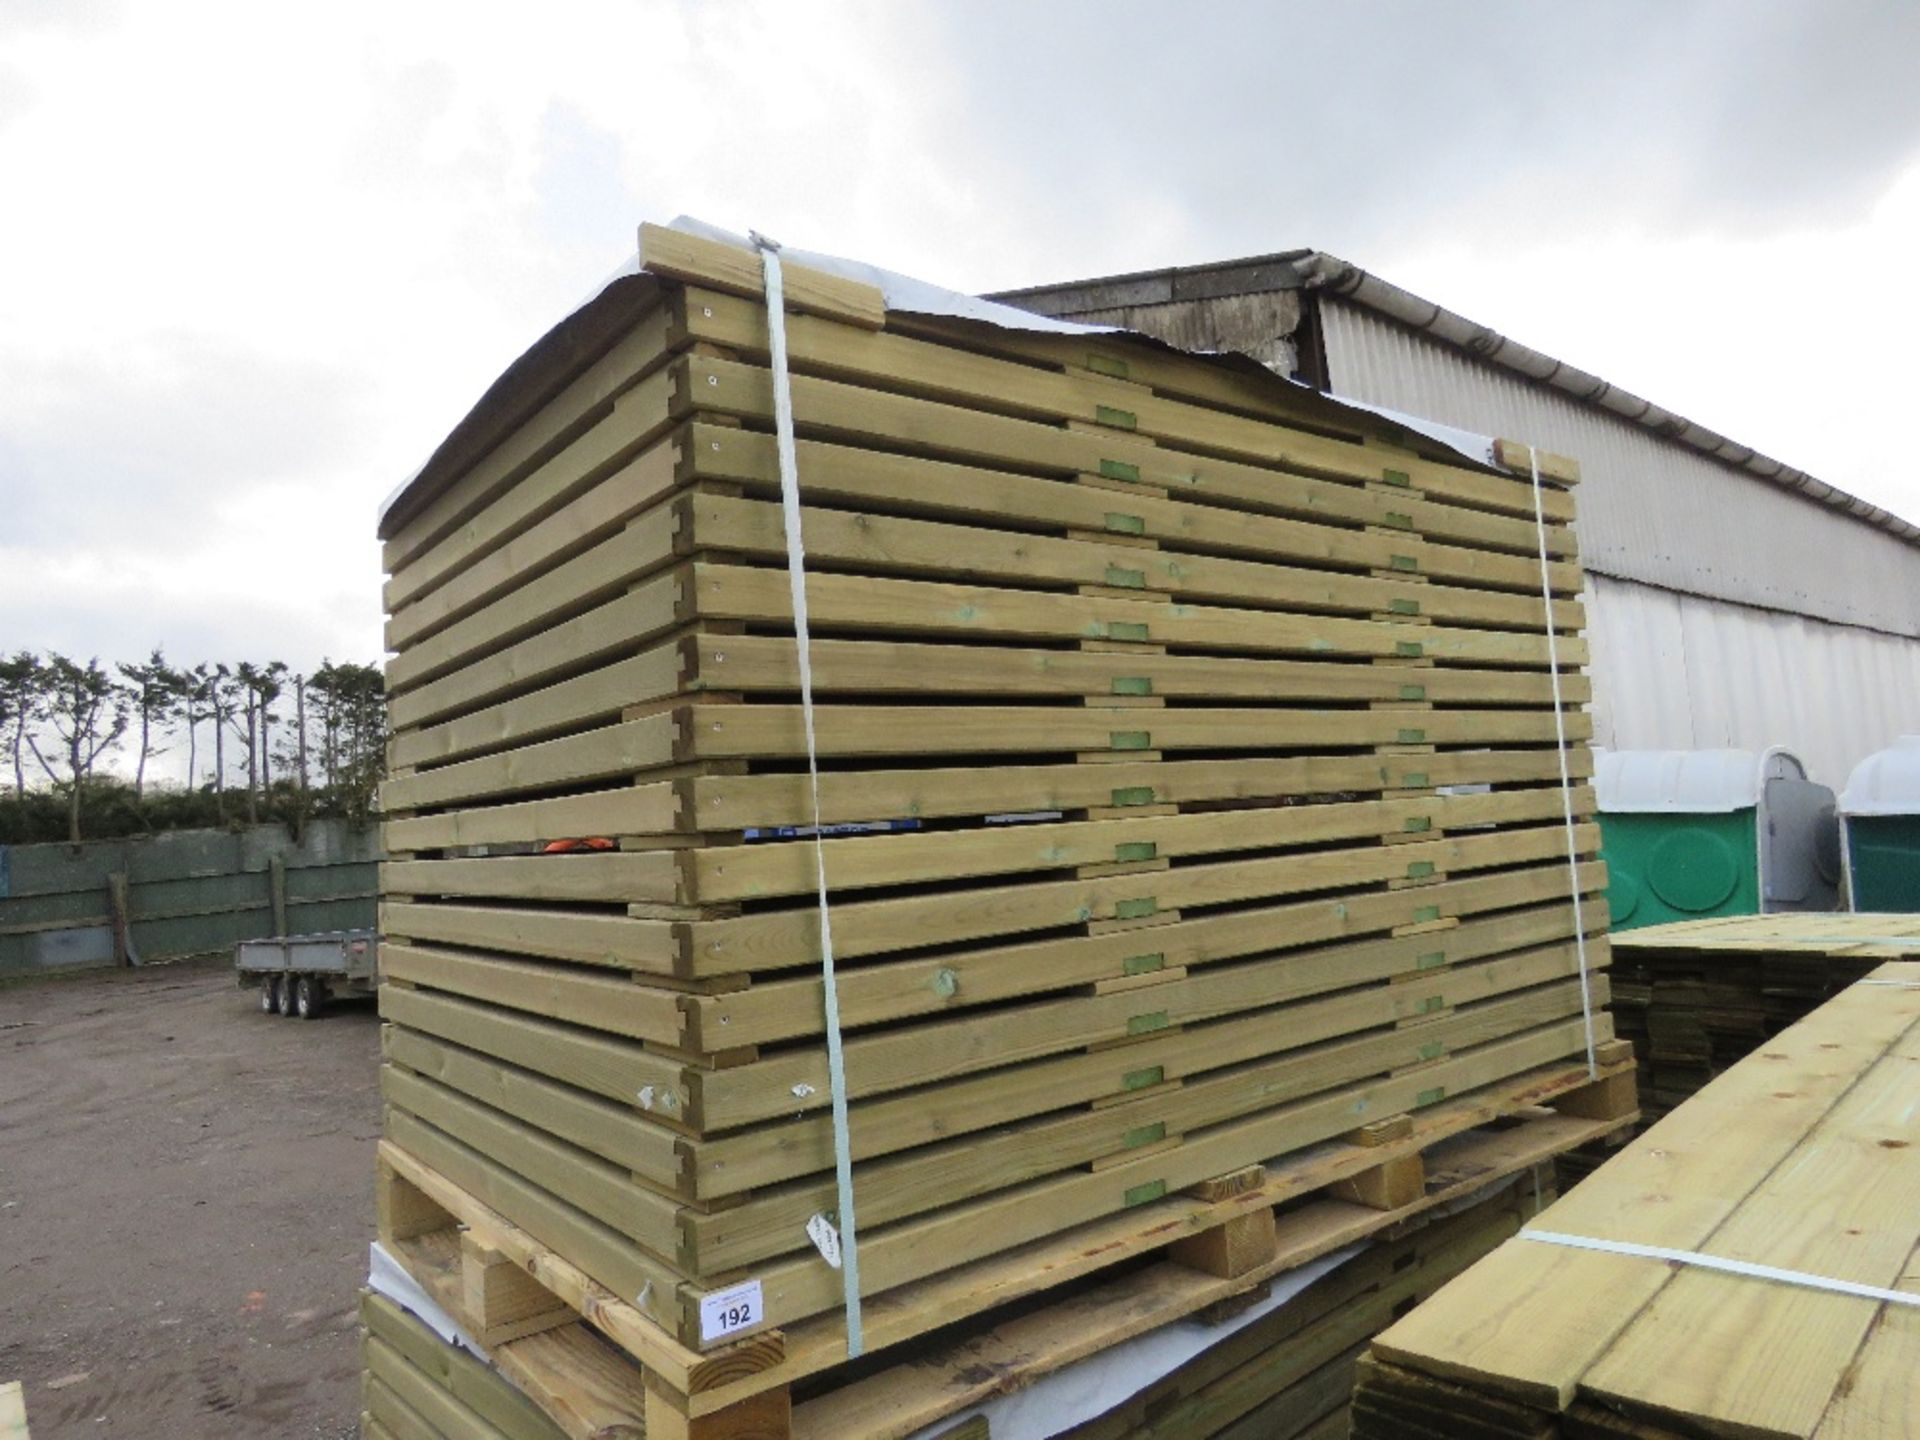 PACK OF VENETIAN SLAT FENCE PANELS 1.83M X 1.22M APPROX. 16NO PANELS IN TOTAL.